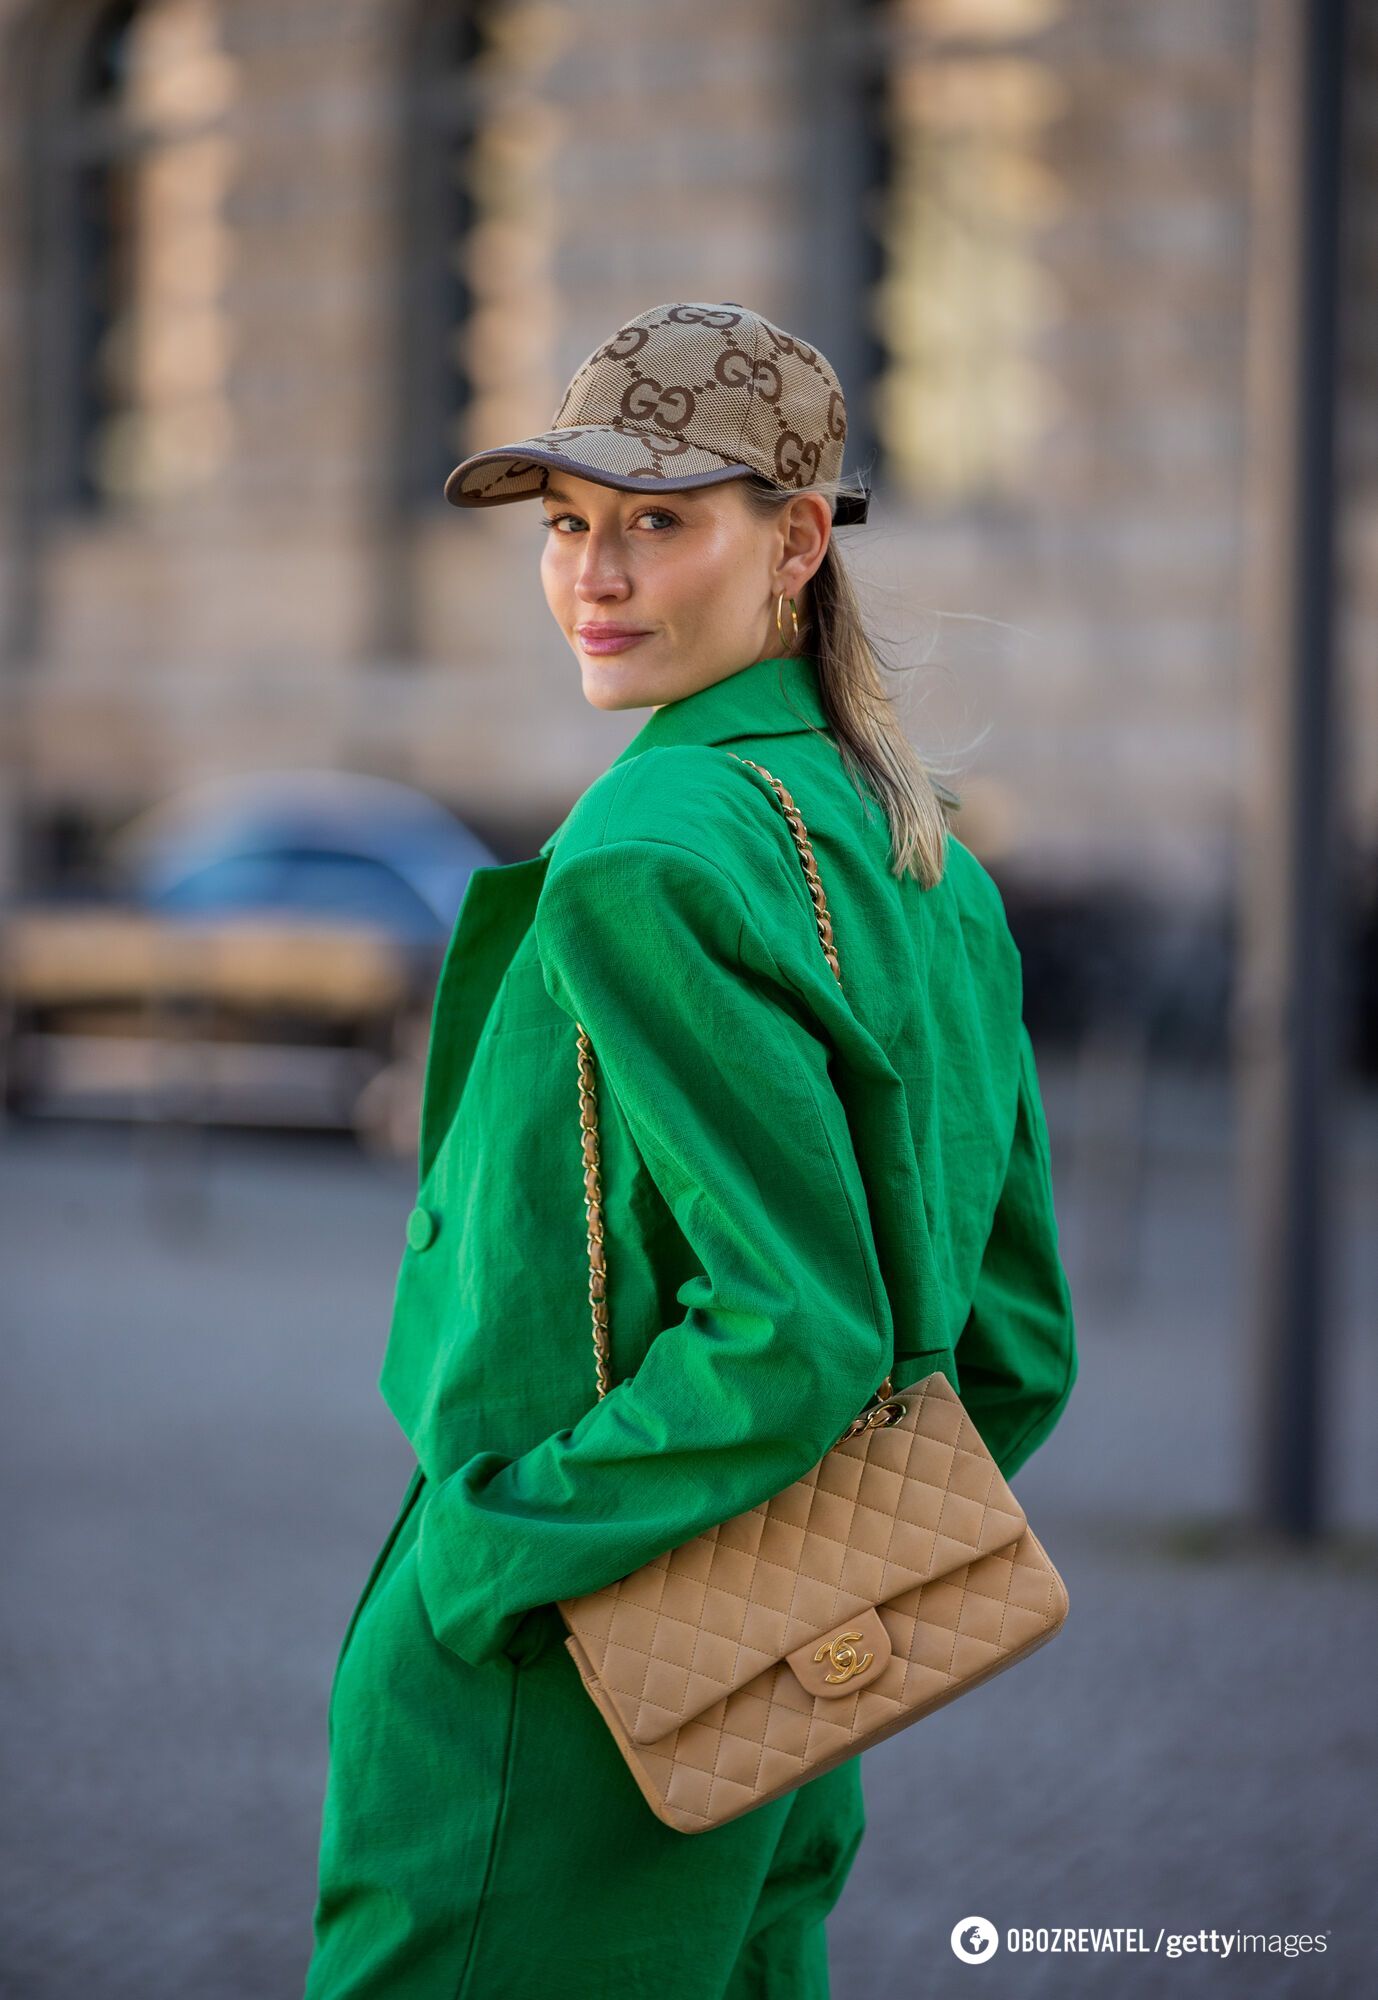 Don't wear them: 5 bag models that are high time to throw away